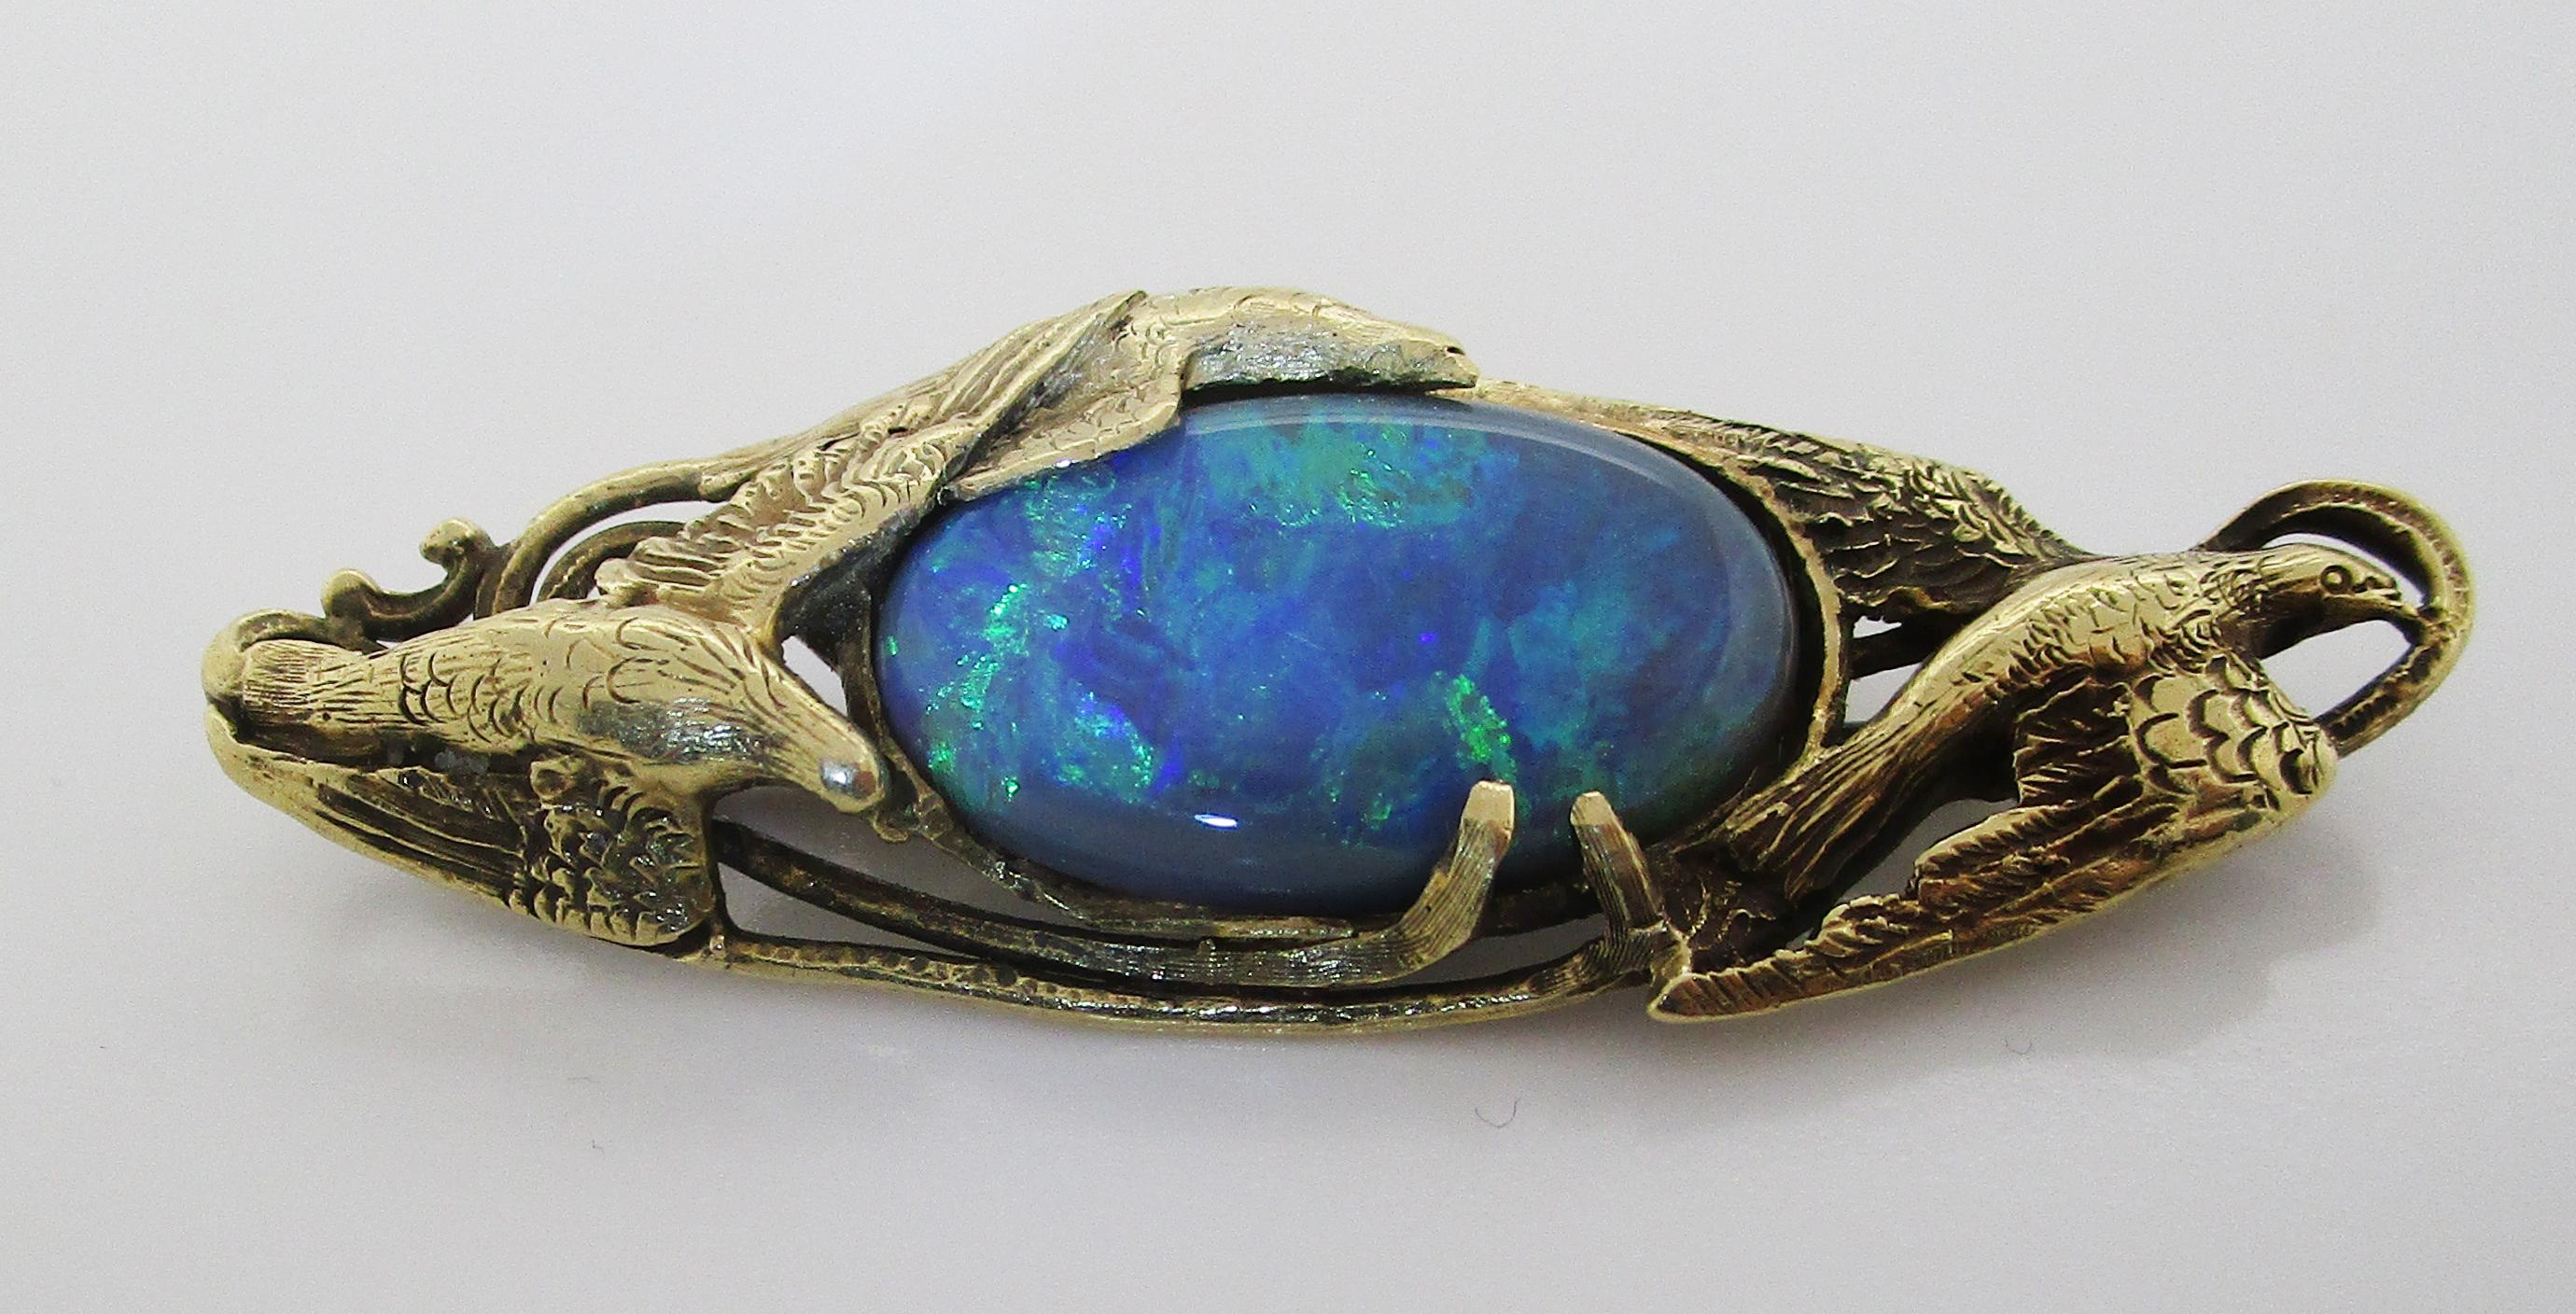 This is a magnificent Arts and Crafts Walton & Co. brooch in 14k green gold featuring an elegant dove design and an enchanting black opal center! The green gold brooch features a design of overlapping doves in flight that is definitive of Arts and